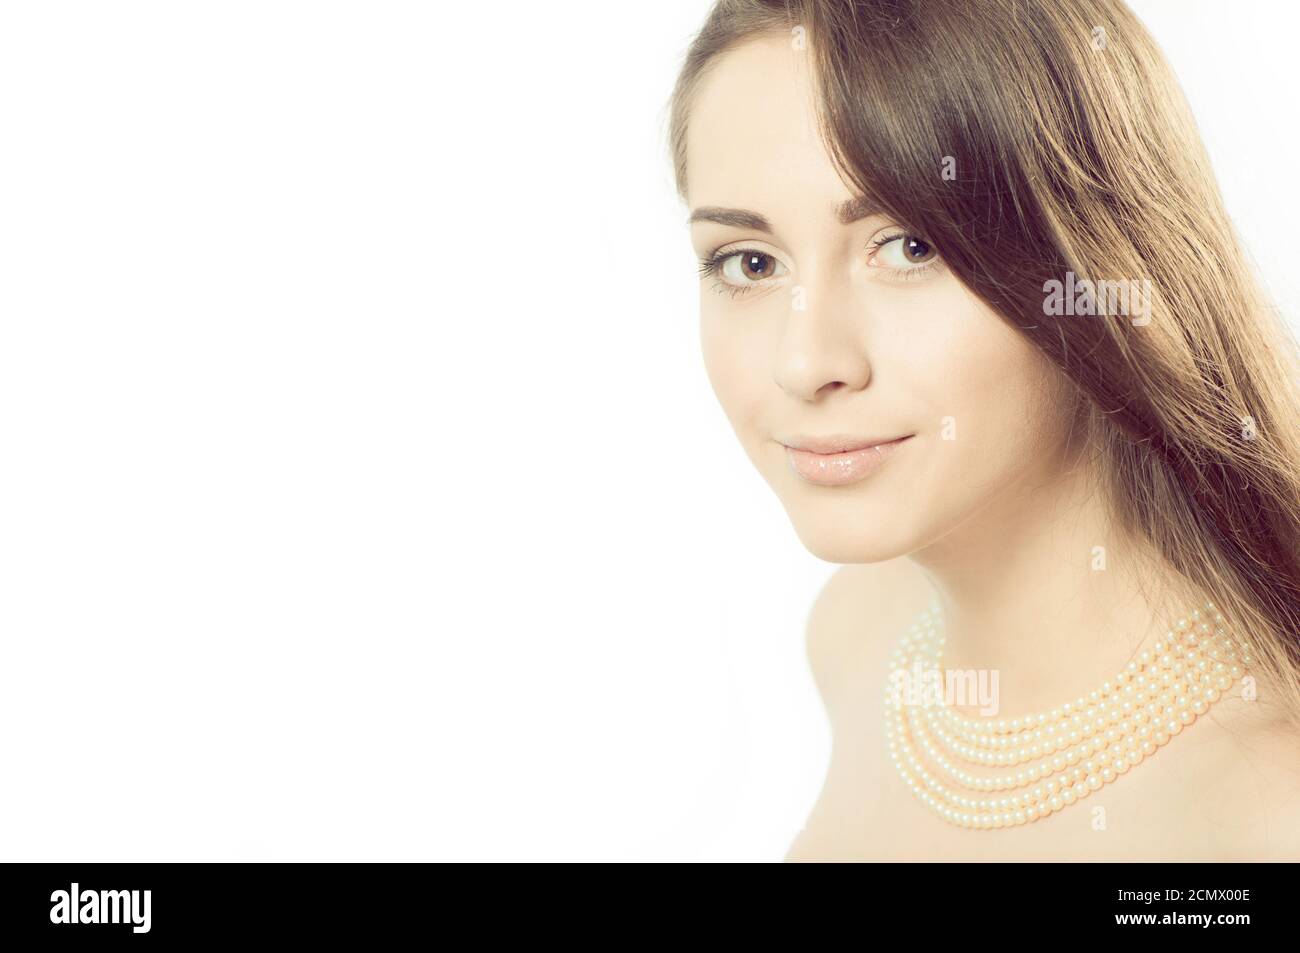 Young brunet woman portrait with expressive emotions Stock Photo